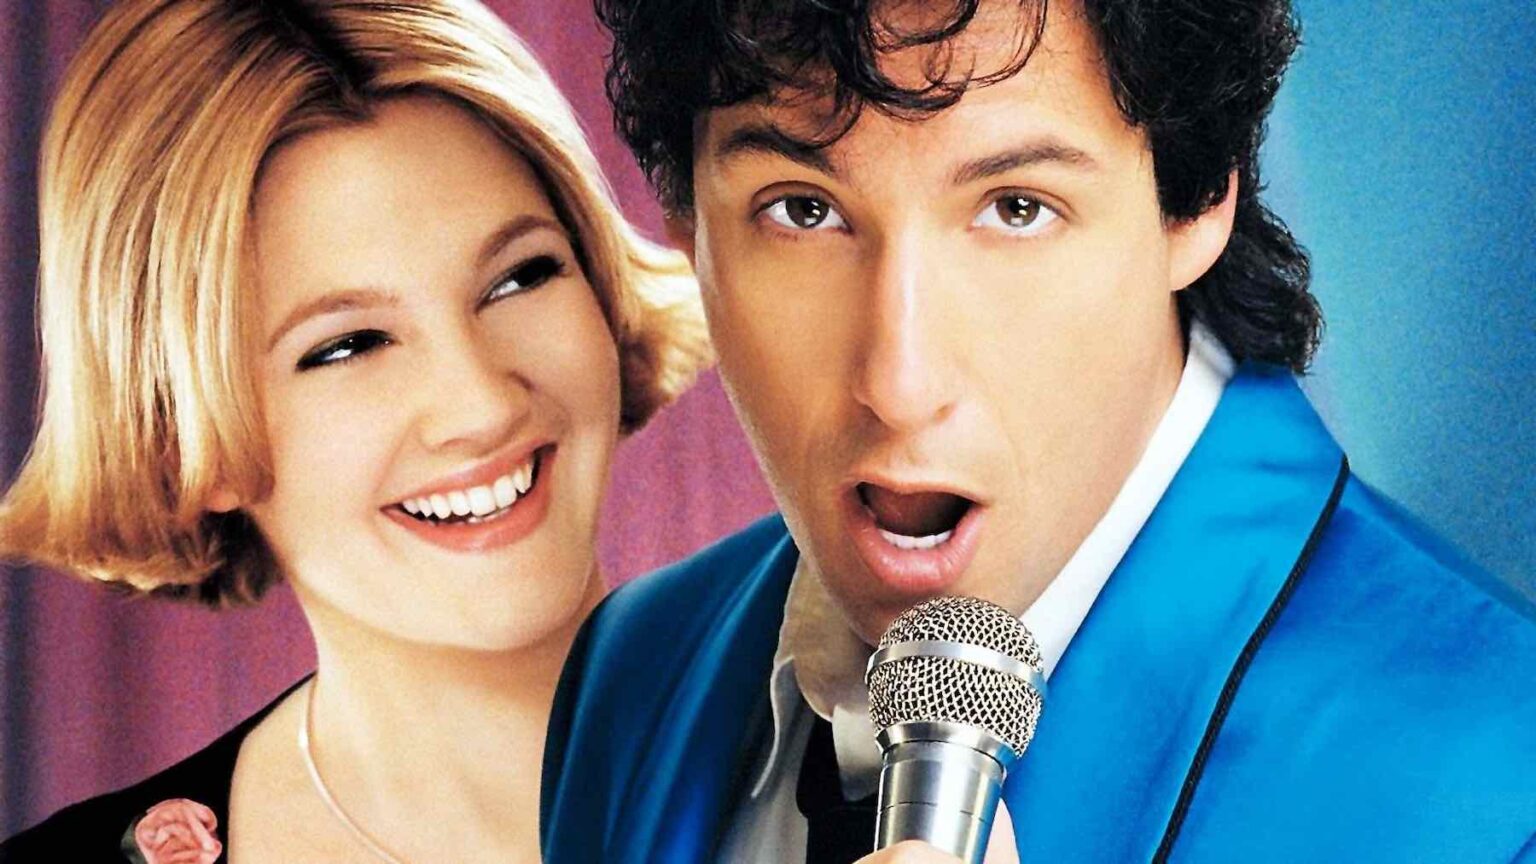 'The Wedding Singer' is the only instance where the fans’ devotion is truly deserved. Does Adam Sandler have other quality movies?